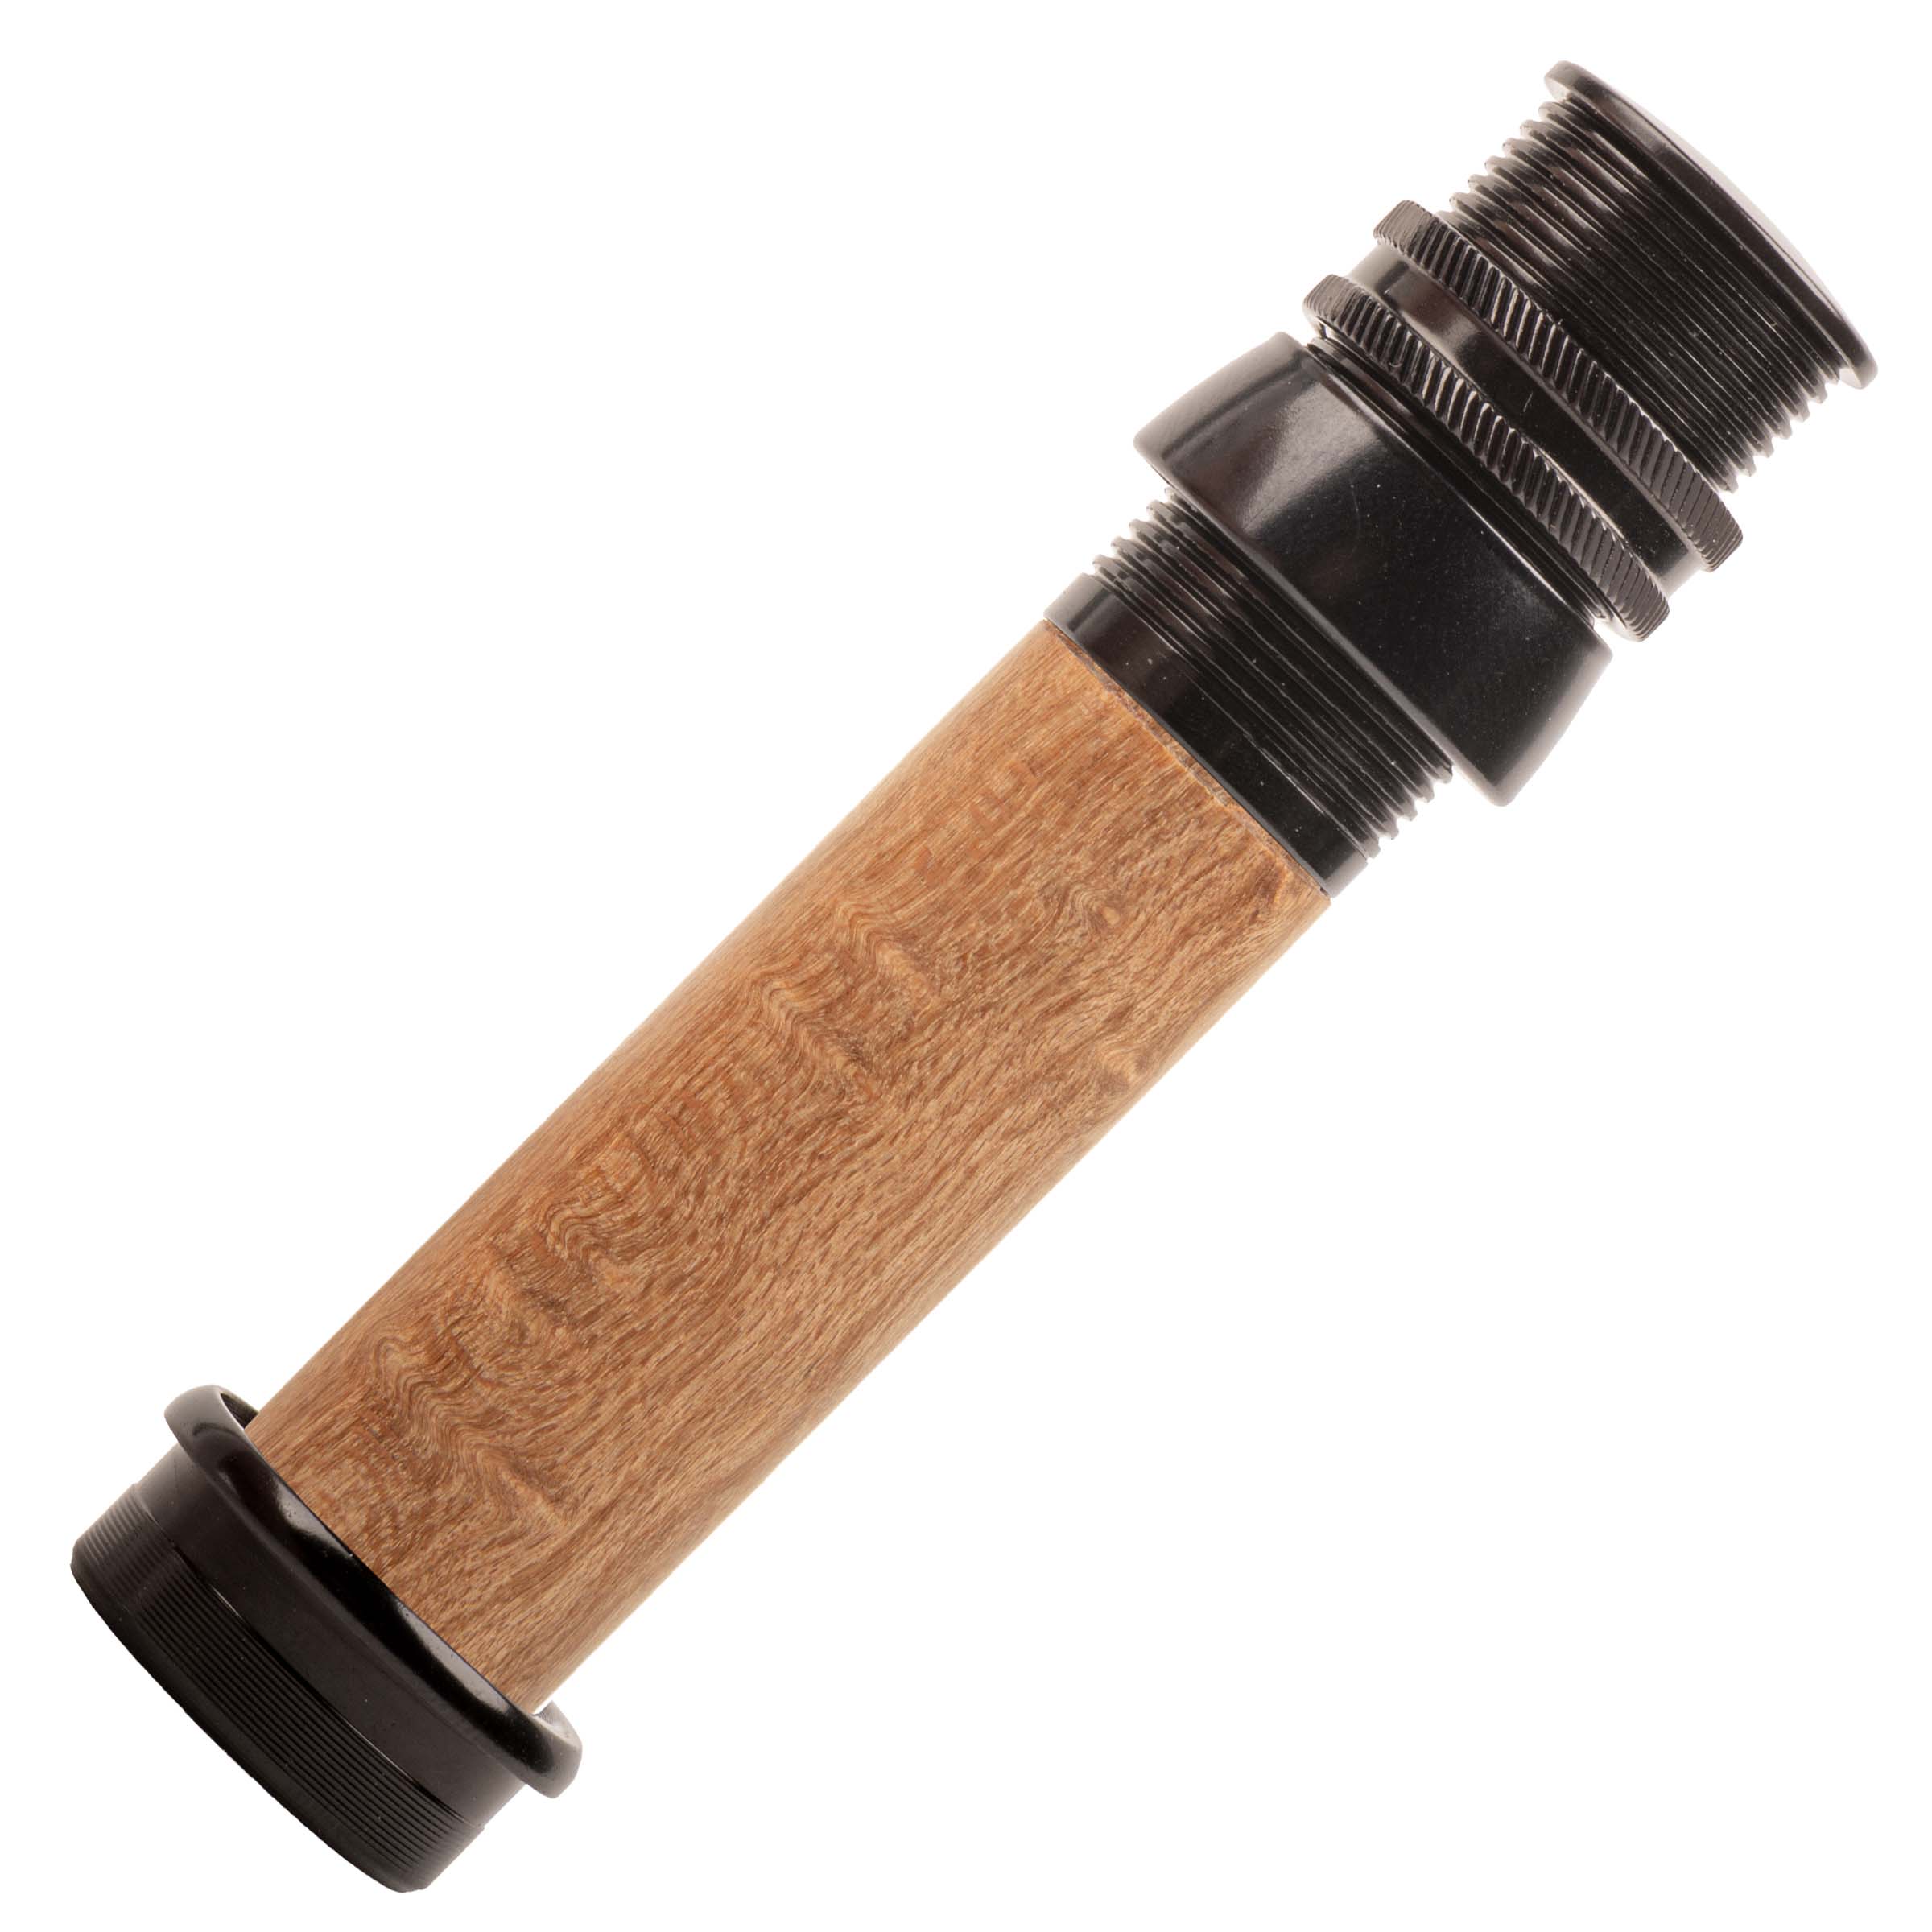 Fly rod reel seat Silver/burled wood